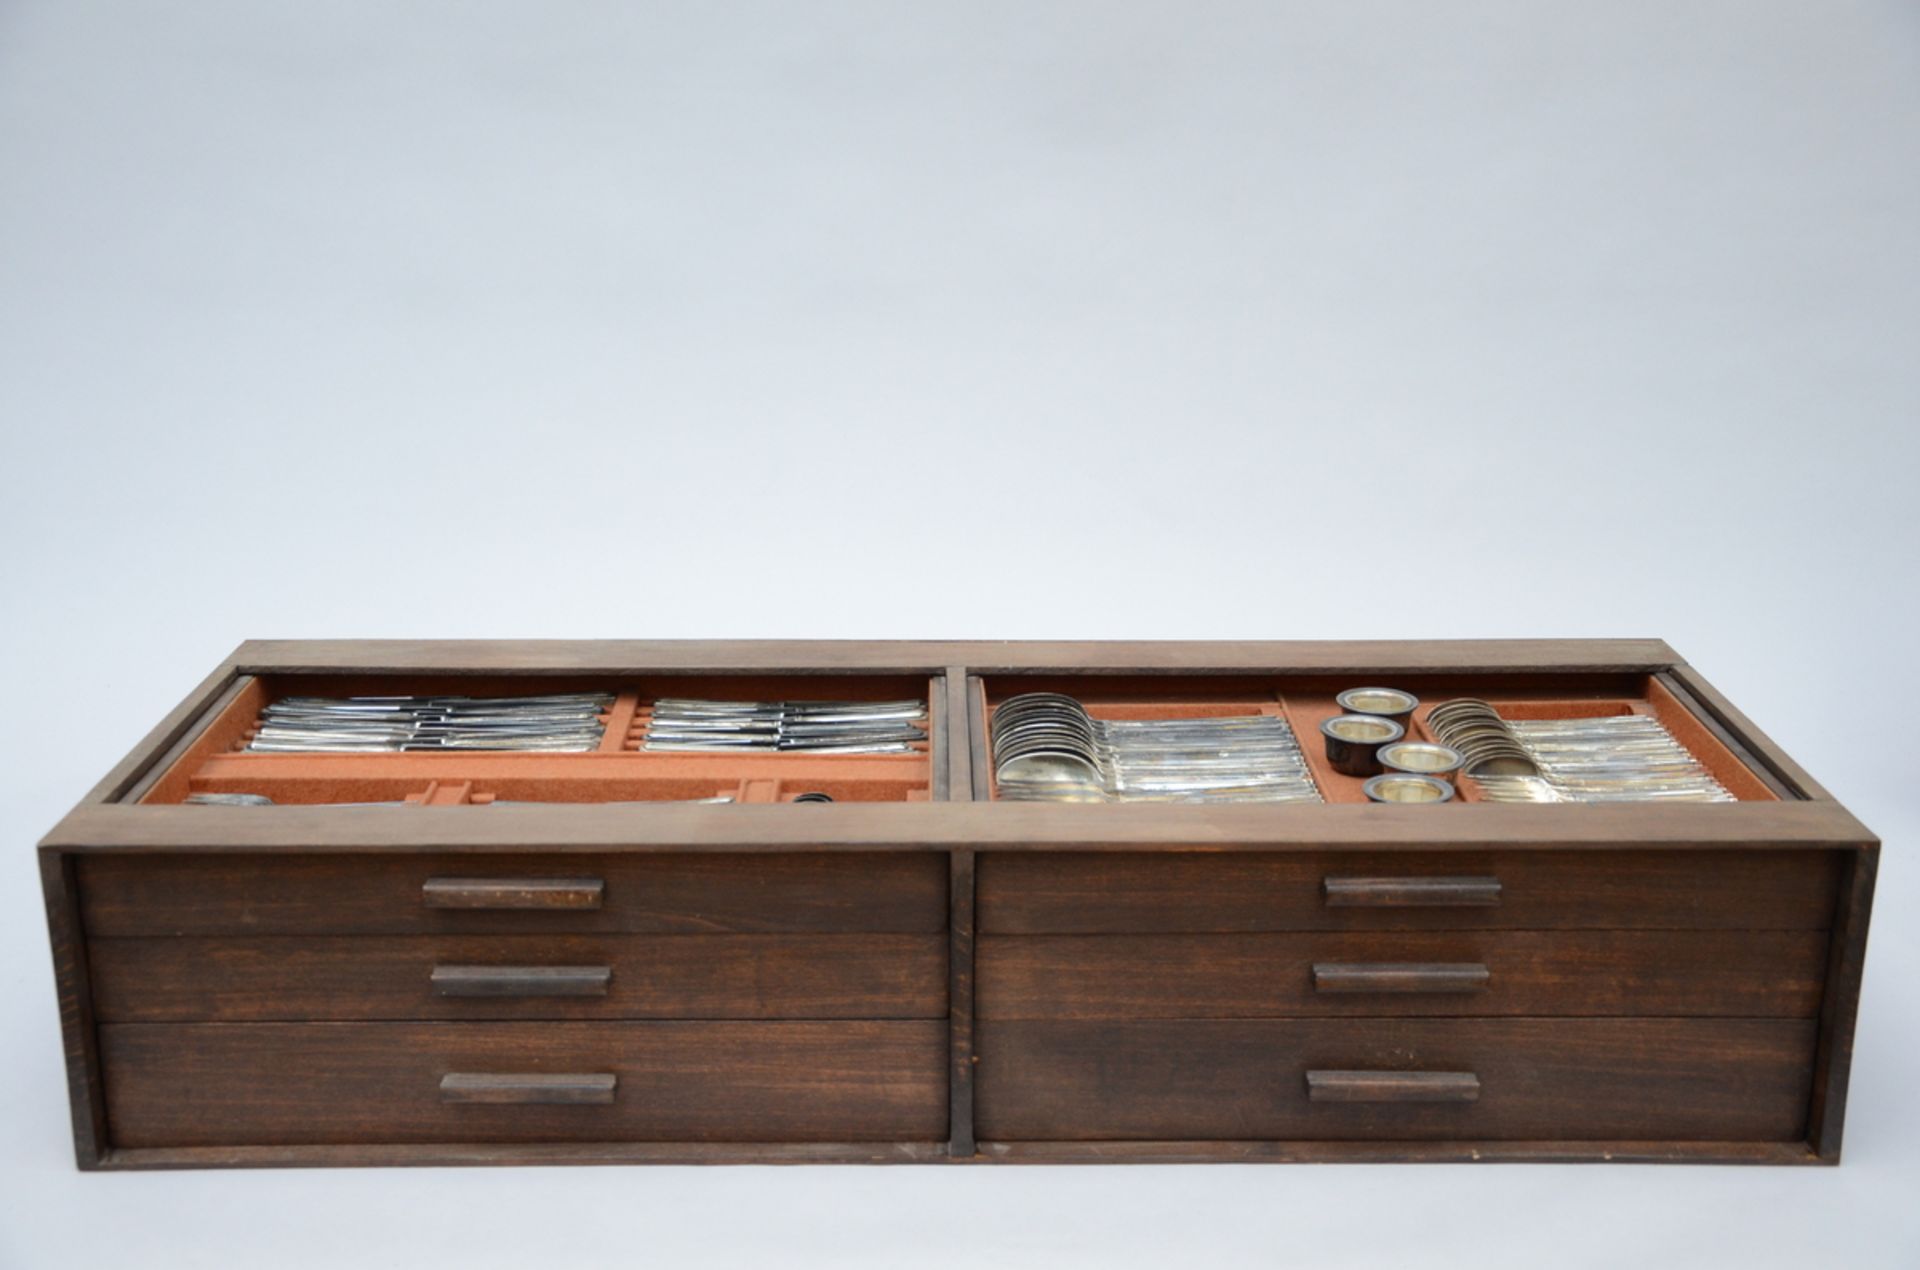 An Art Deco cutlery set in a wooden case, for 12 people